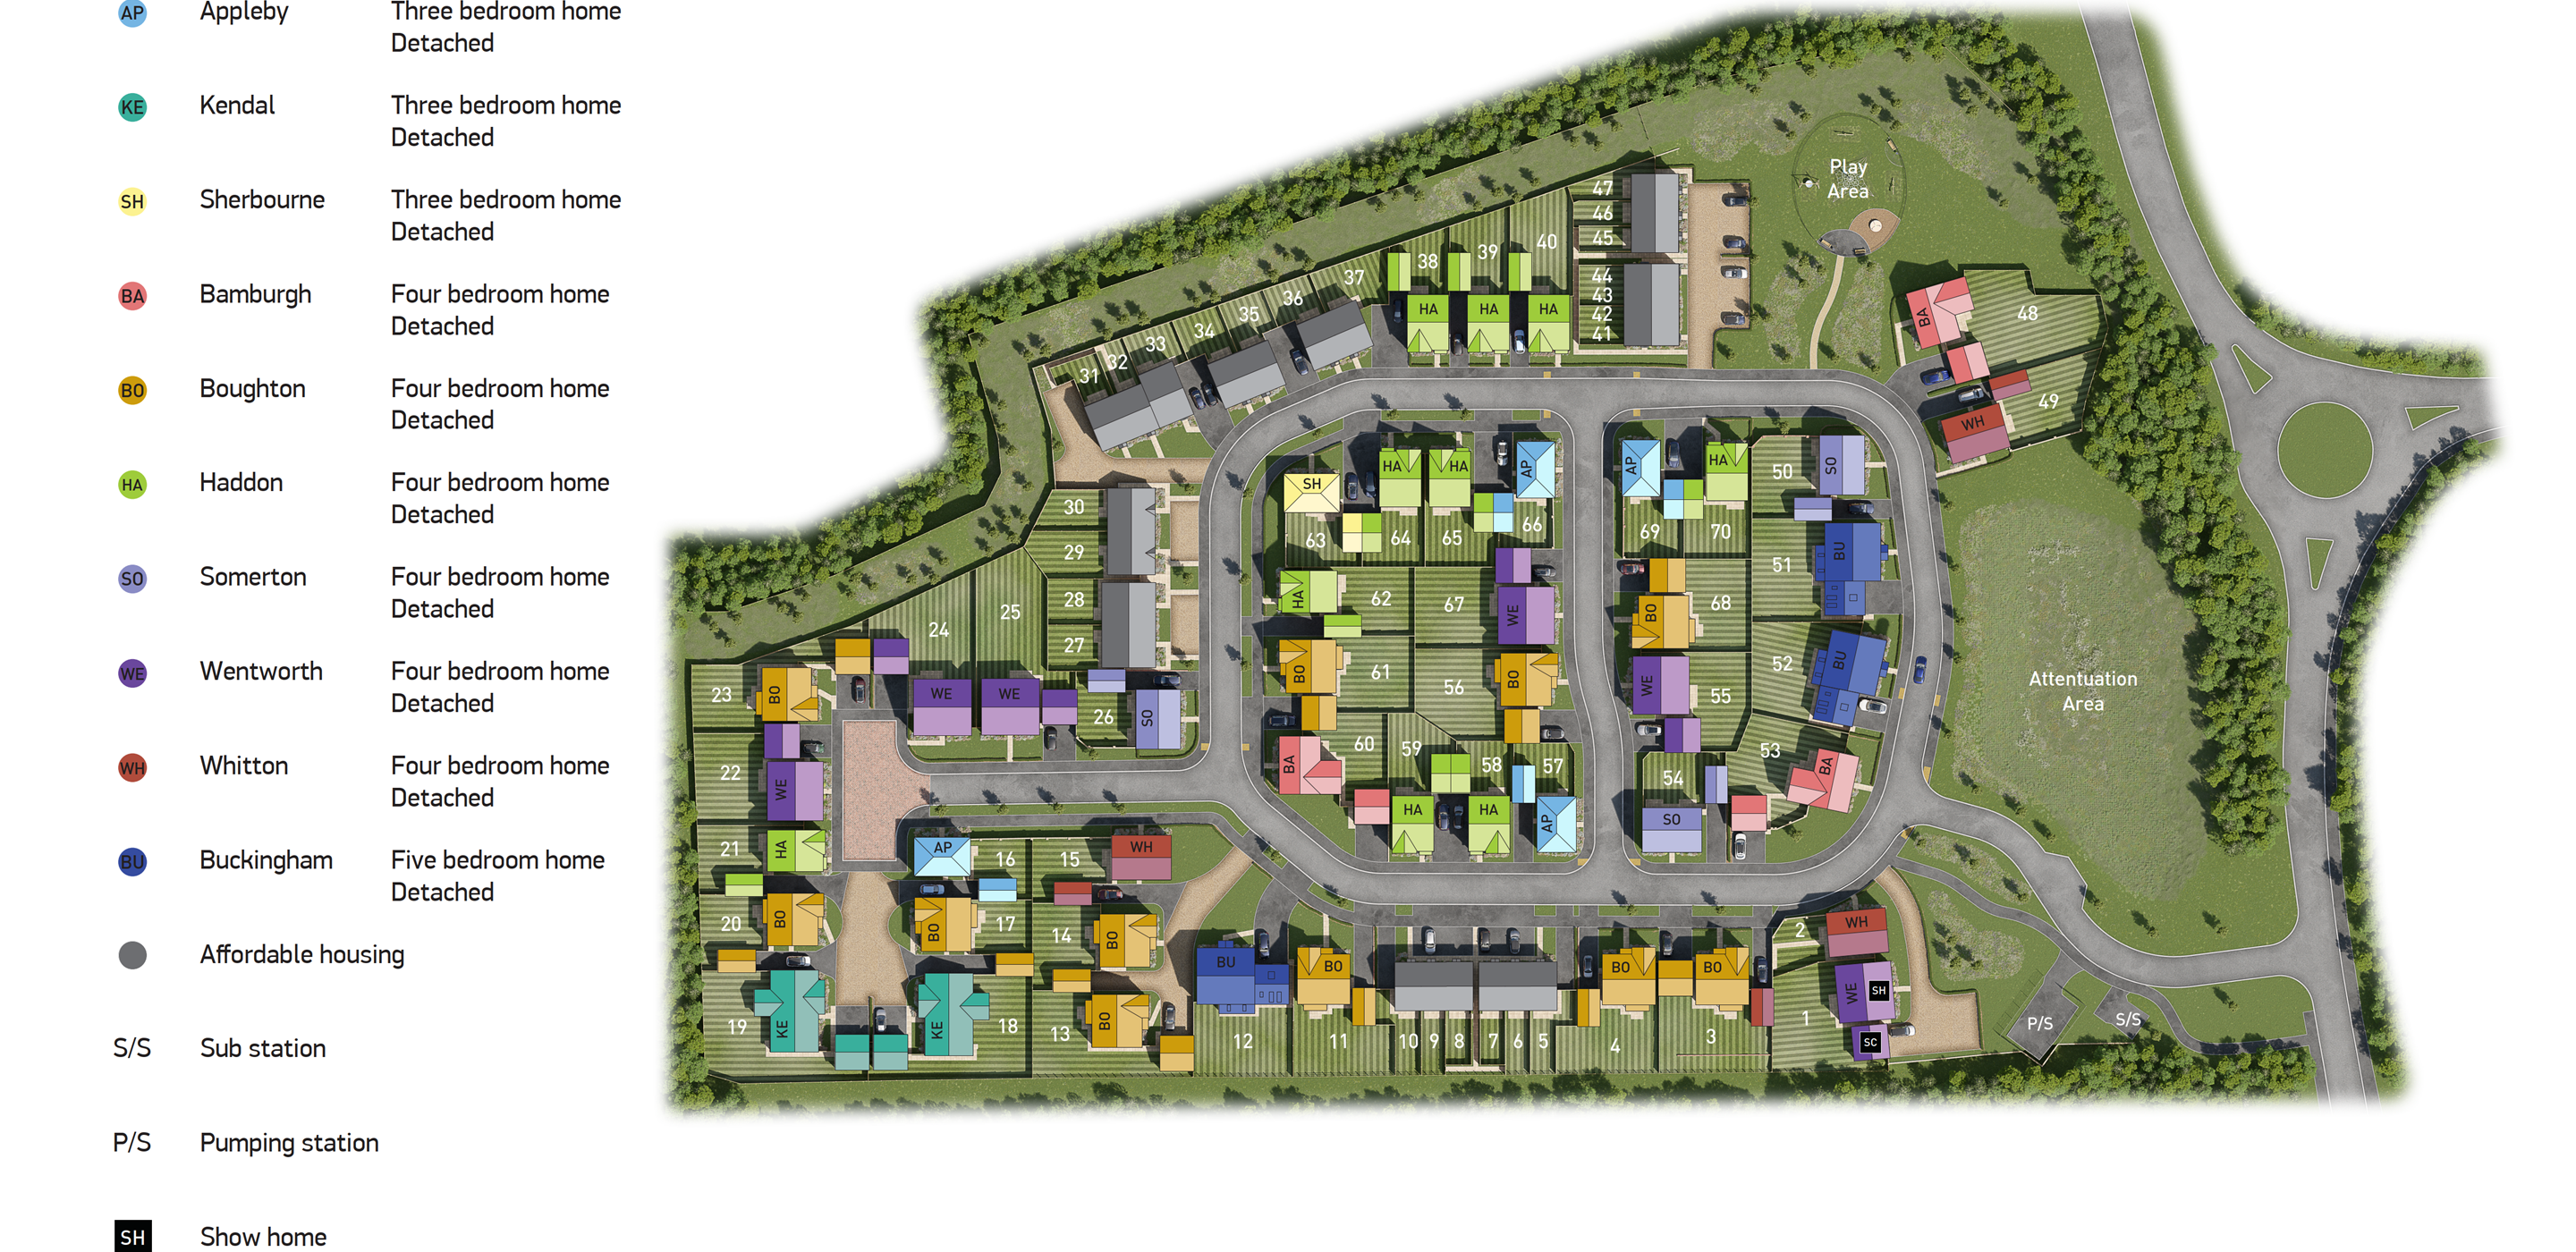 Cover image for Interactive Site Plan